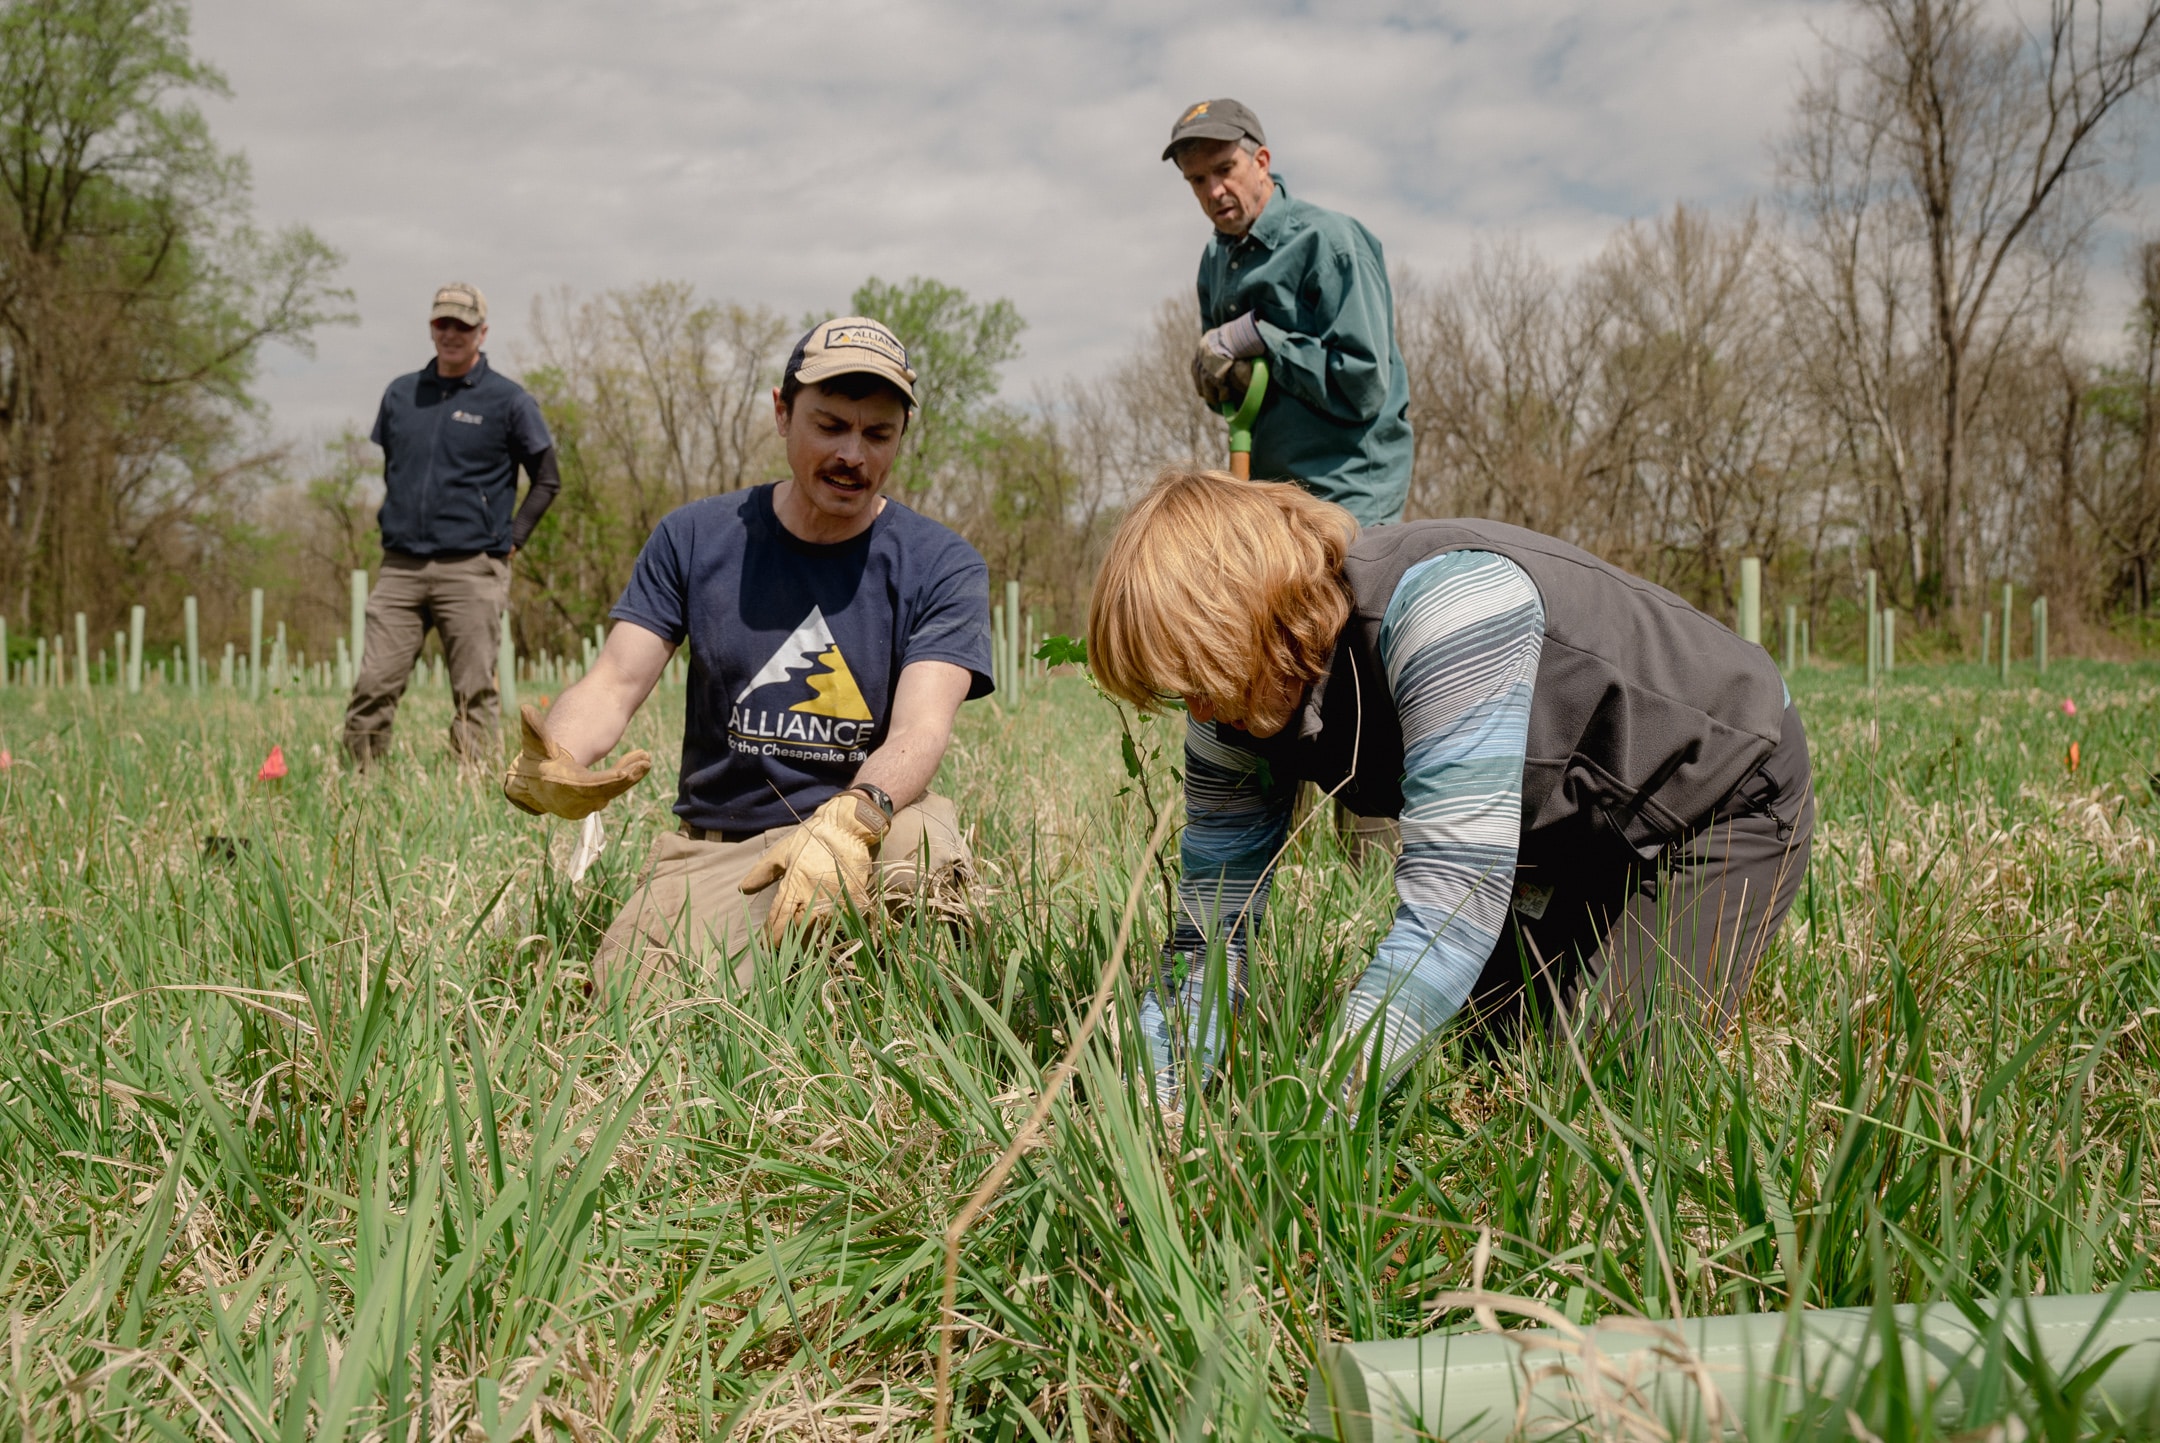 Alliance staff and DCNR staff planting a seedling